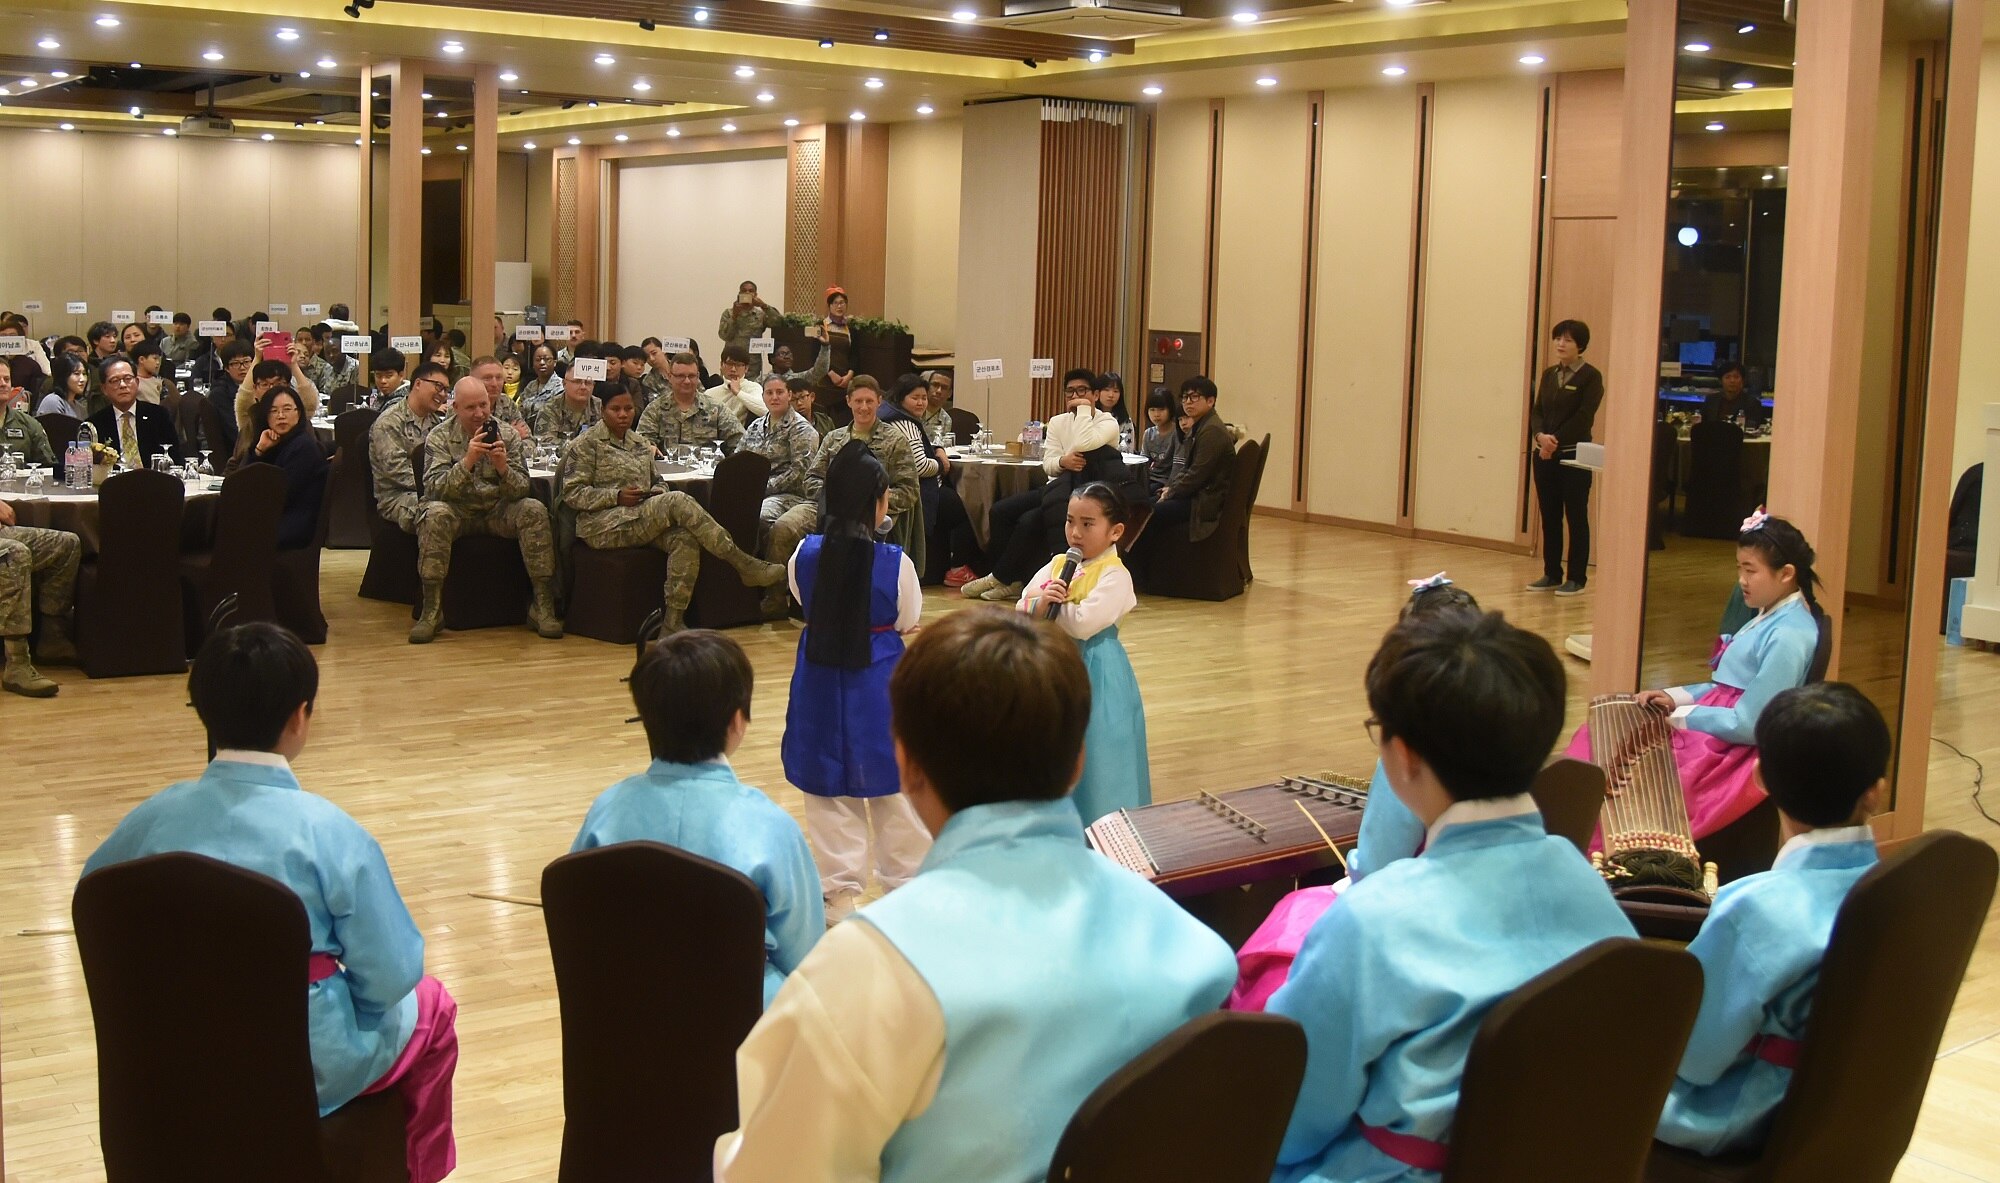 Students from Dangbook Elementary School perform a traditional Korean play during a volunteer appreciation night at the Hanwon Convention room in the city of Gunsan, Republic of Korea, Nov. 8, 2016. The students participated in an English language program taught by 8th Fighter Wing airmen. (U.S. Air Force photo by Tech. Sgt. Jeff Andrejcik/Released)